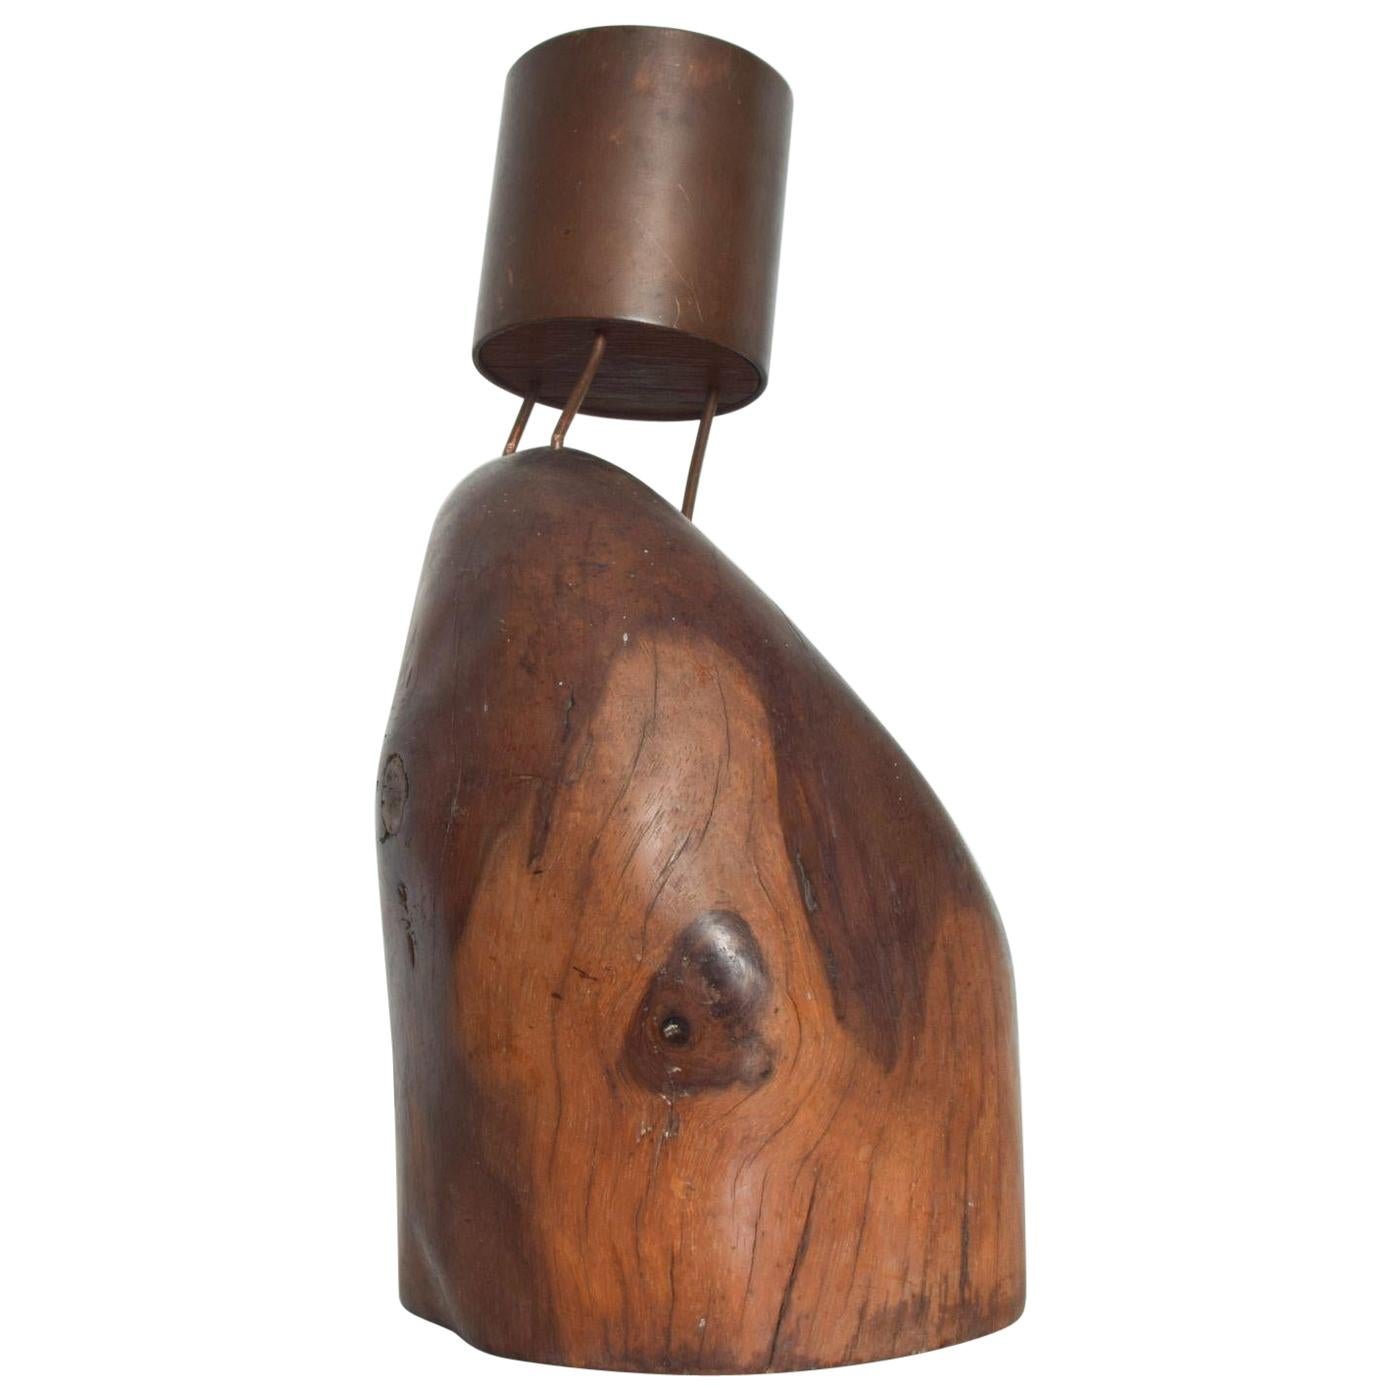 Candle Holder
Fascinating piece by Don Shoemaker Votive Candle Holder in Bronze & Exotic Cocobolo Wood.
Mexican Modernism in fine mid-century vintage appeal by Don Shoemaker of Mexico circa 1960s
Original Preowned Vintage Unrestored Condition. Refer